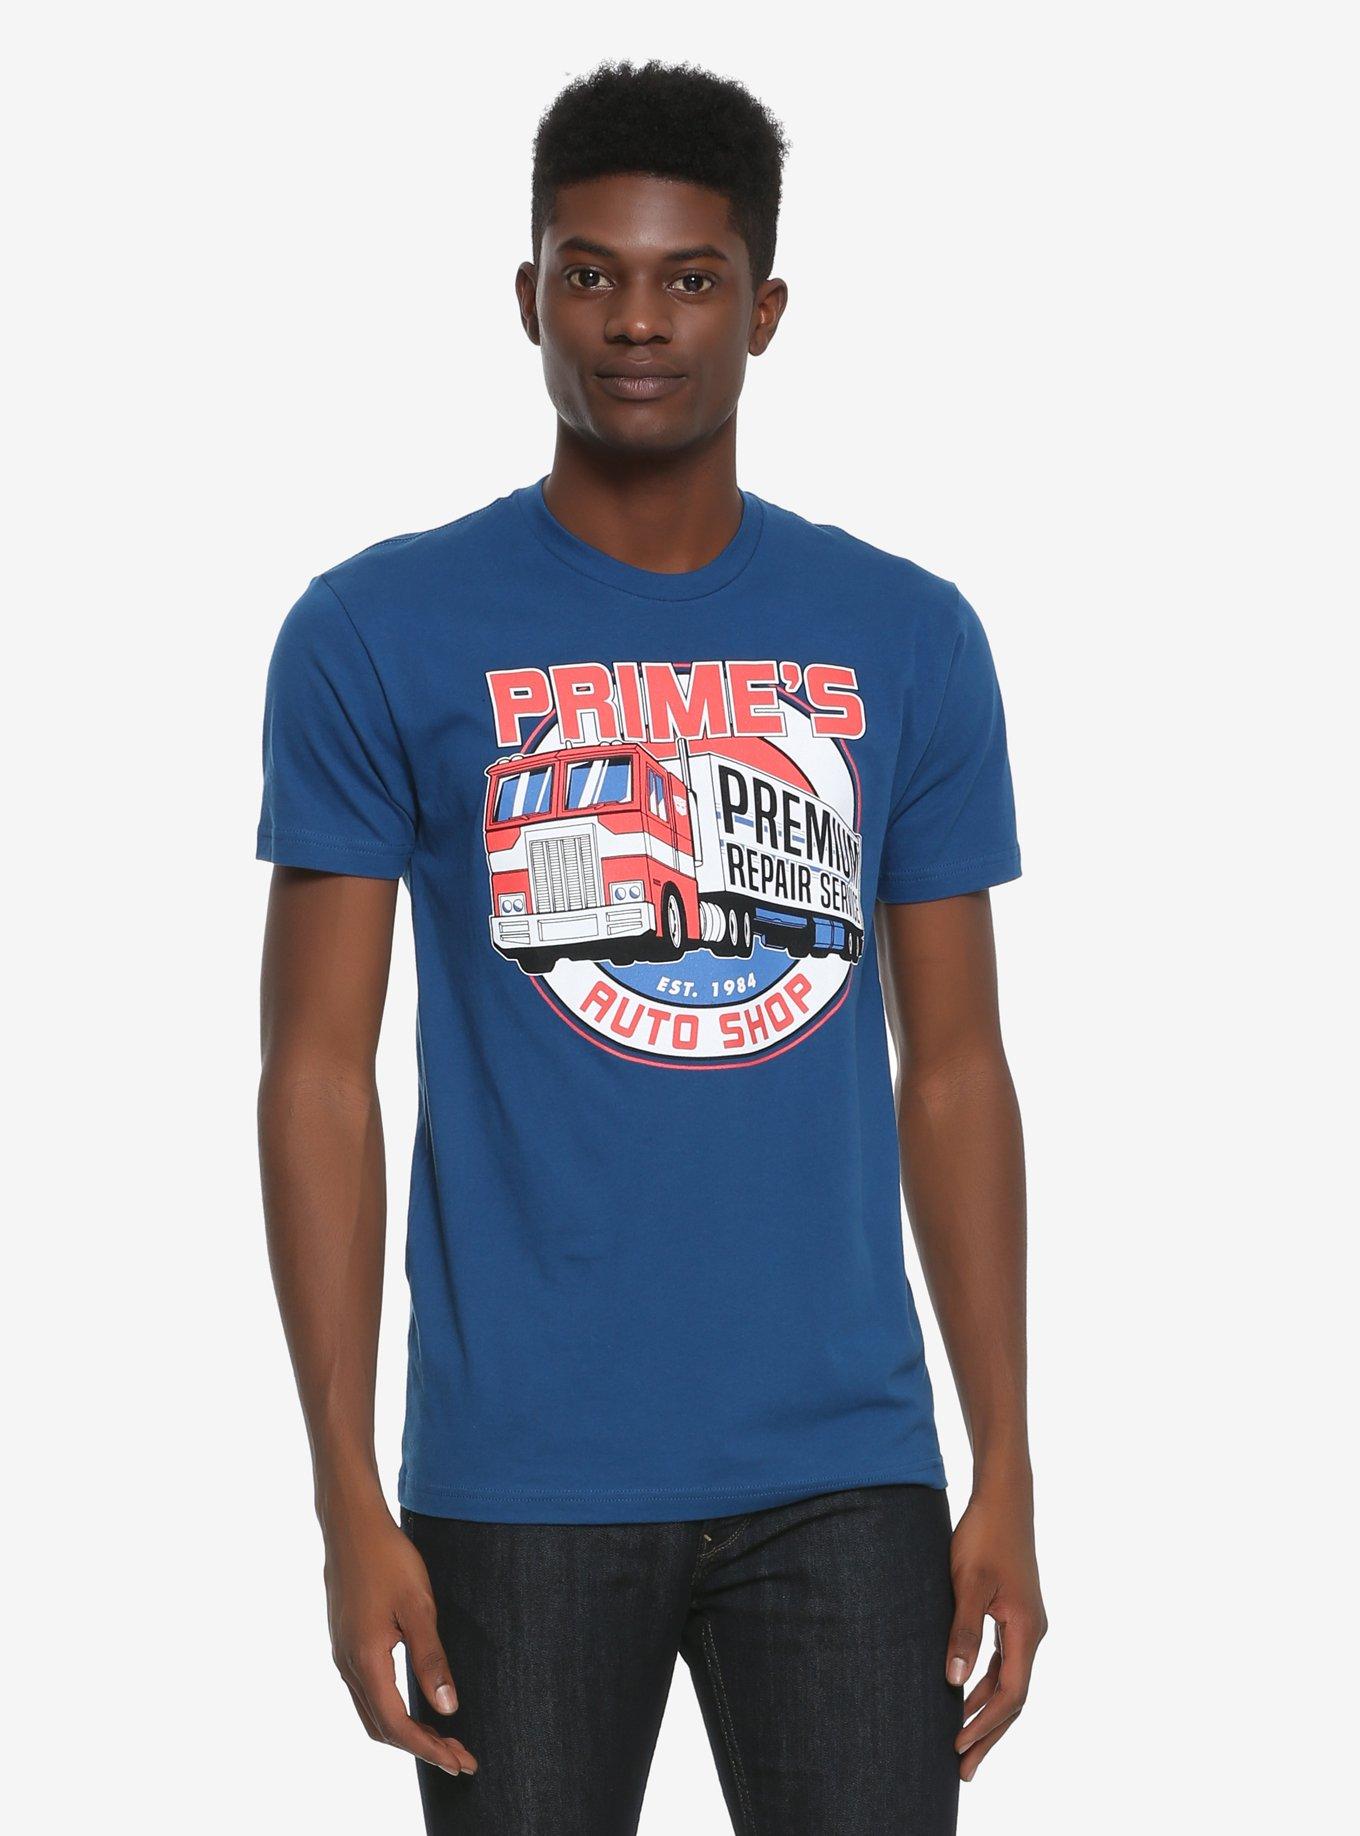 Transformers Prime's Autoshop T-Shirt | BoxLunch